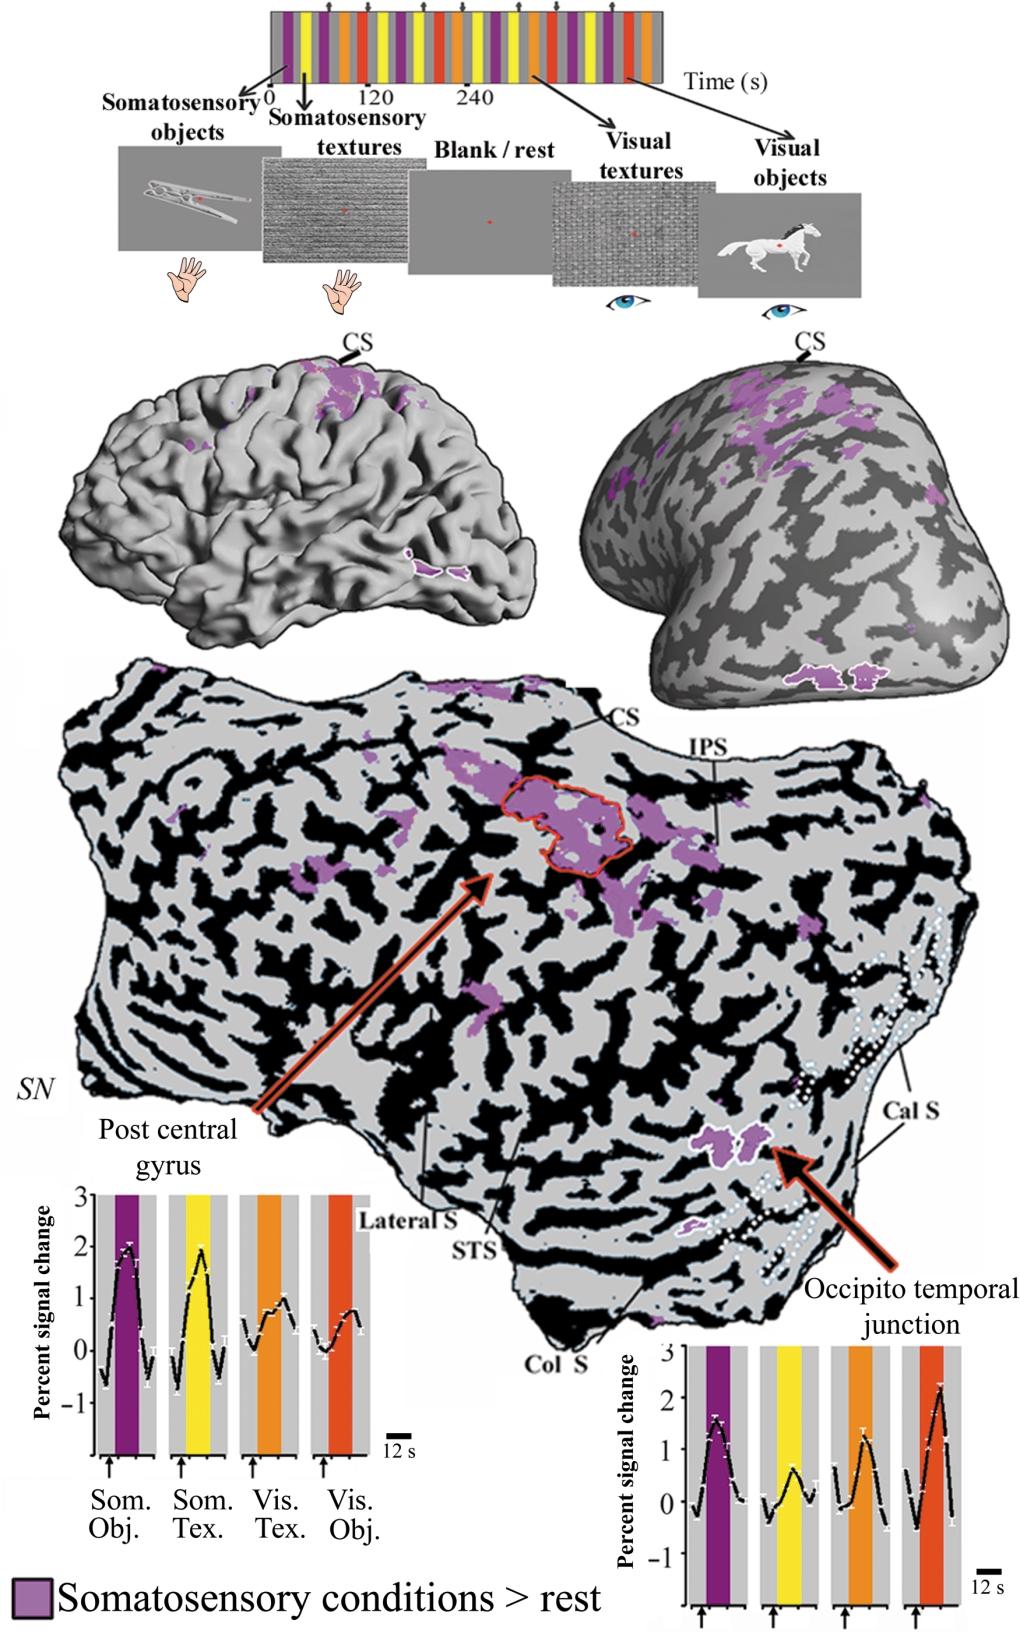 a b d c Fig. 1. Somatosensory clusters in the occipito temporal region showing multimodal (visuo-haptic) object selectivity. (a) The experimental protocol used in the main experiment.